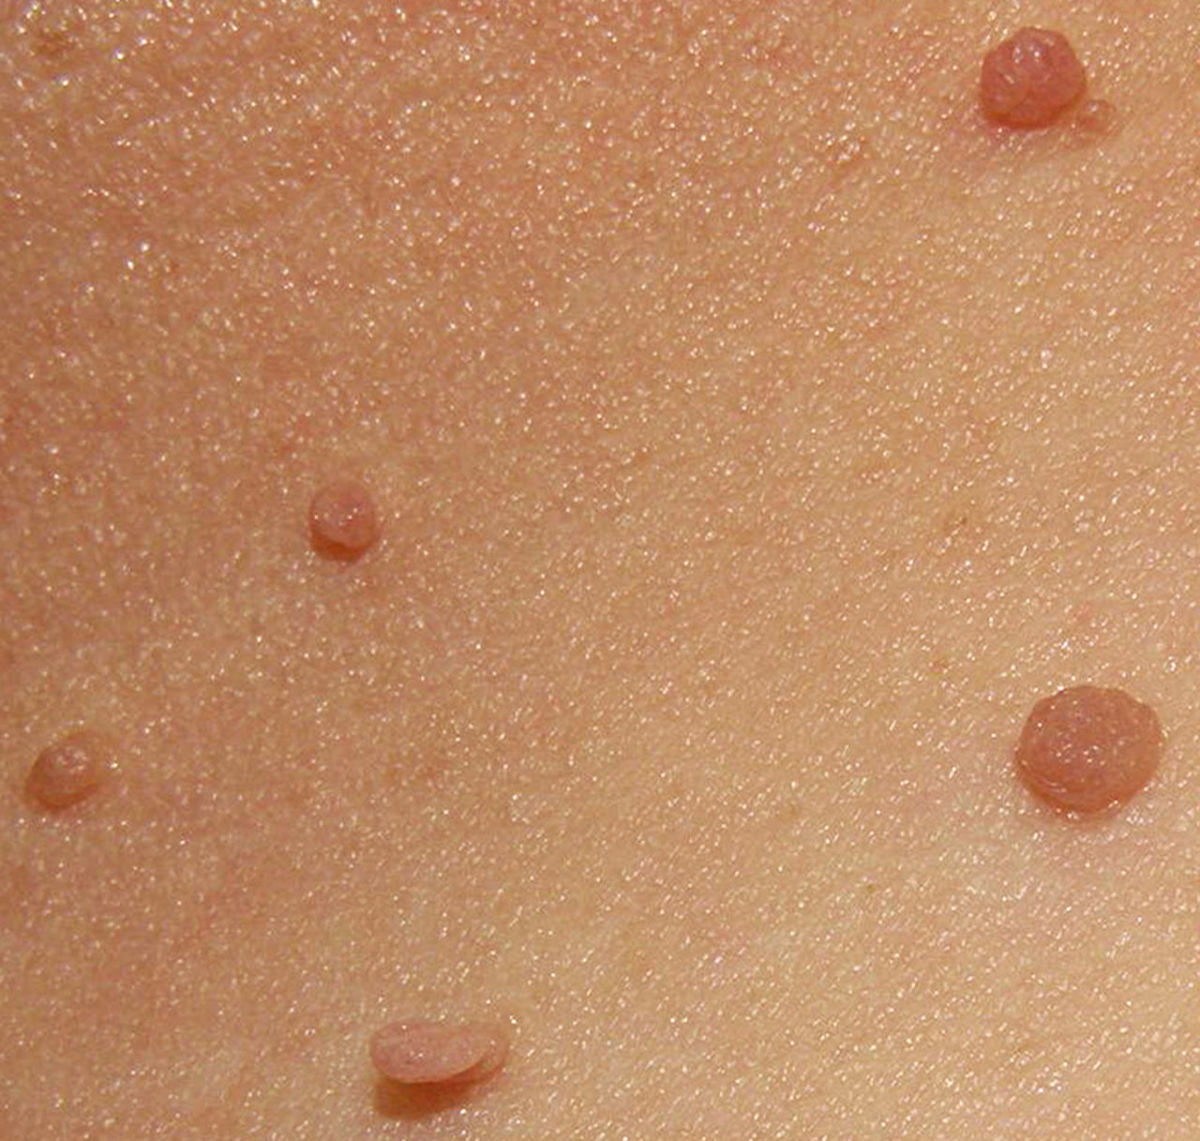 Harmless skin tags. Once they might have been designated as a witch's teats, where her familiars fed.